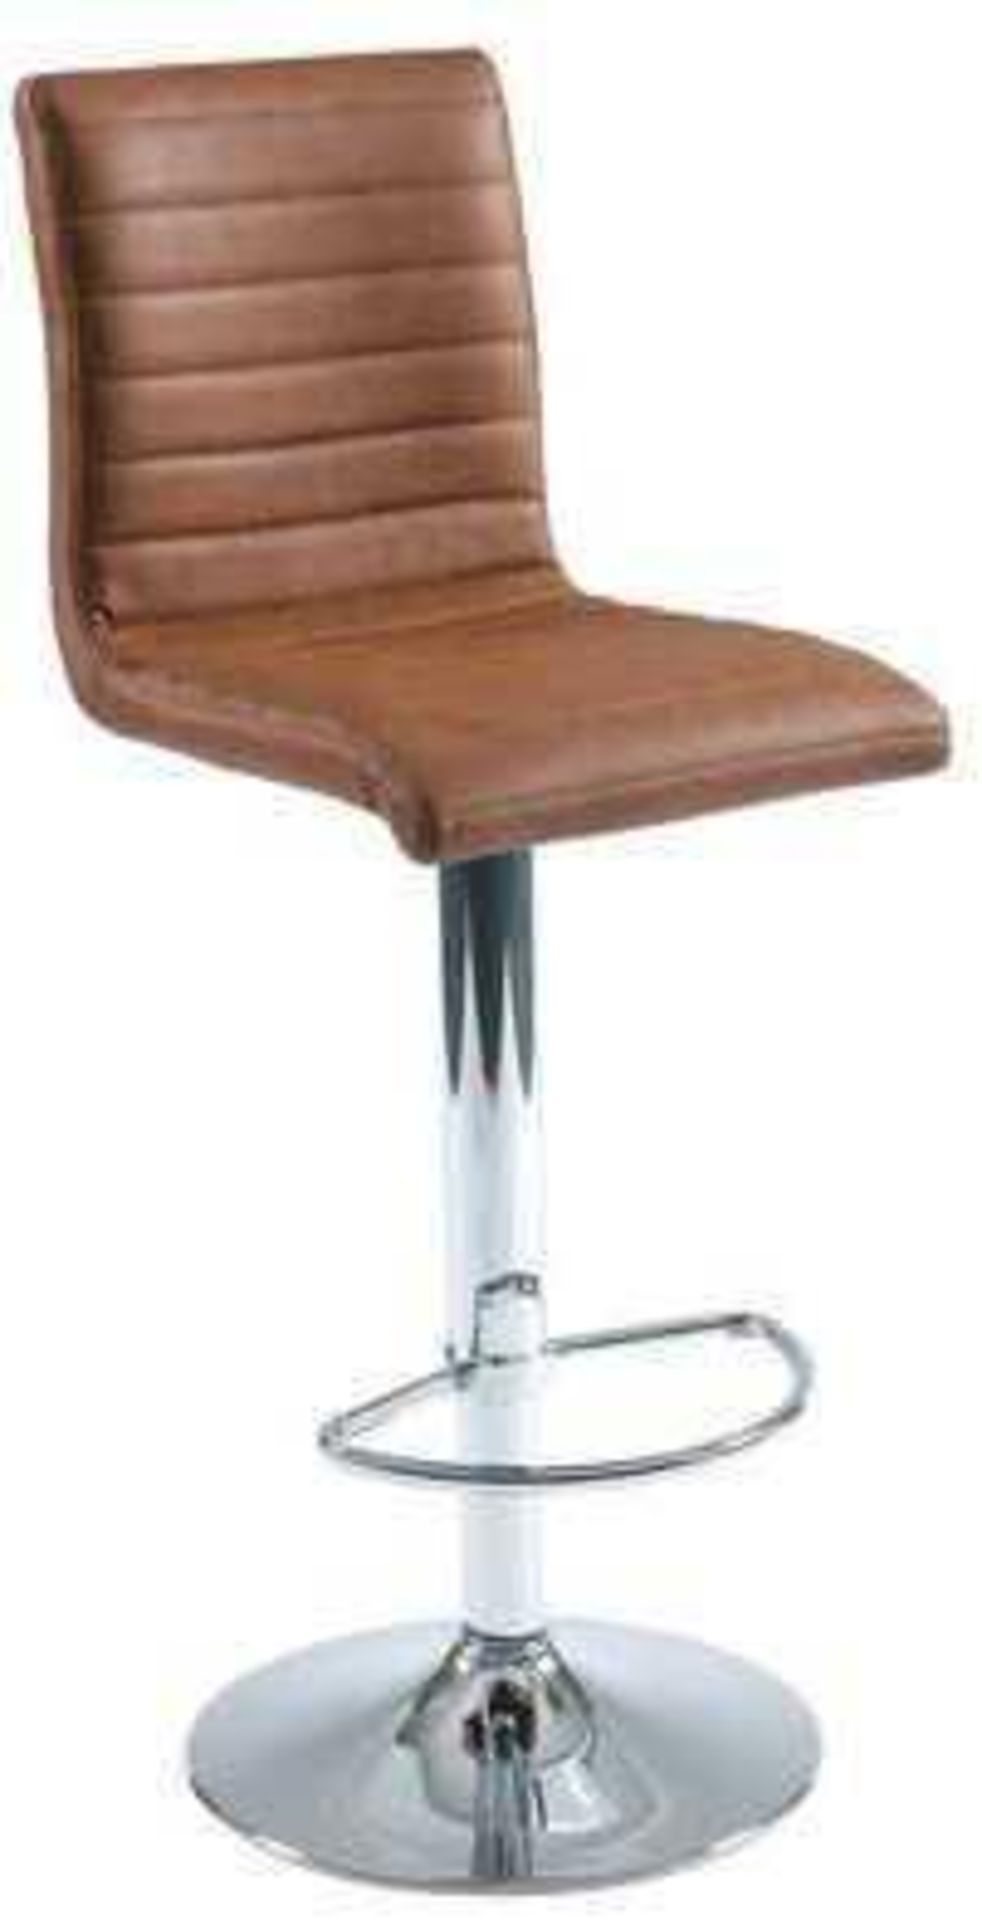 RRP £200 - Boxed New 2 'Cool' Barstools In Brown Faux Leather With Chrome Base